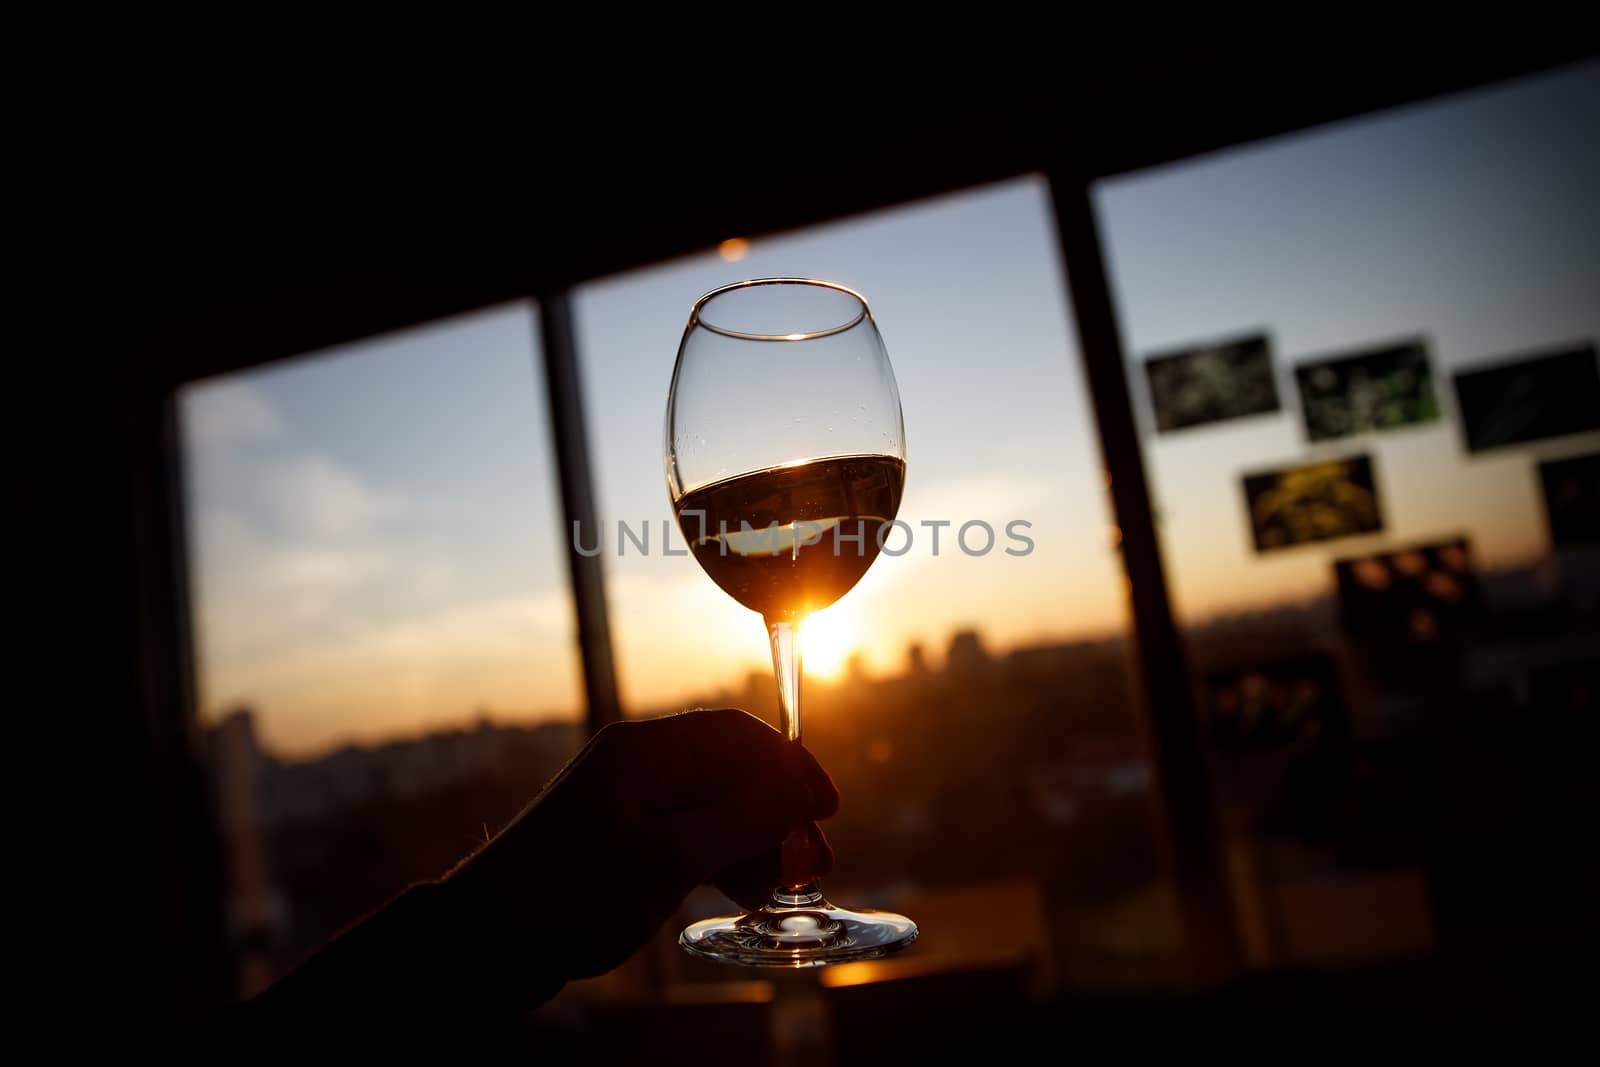 Wine glass in a hand over sunset